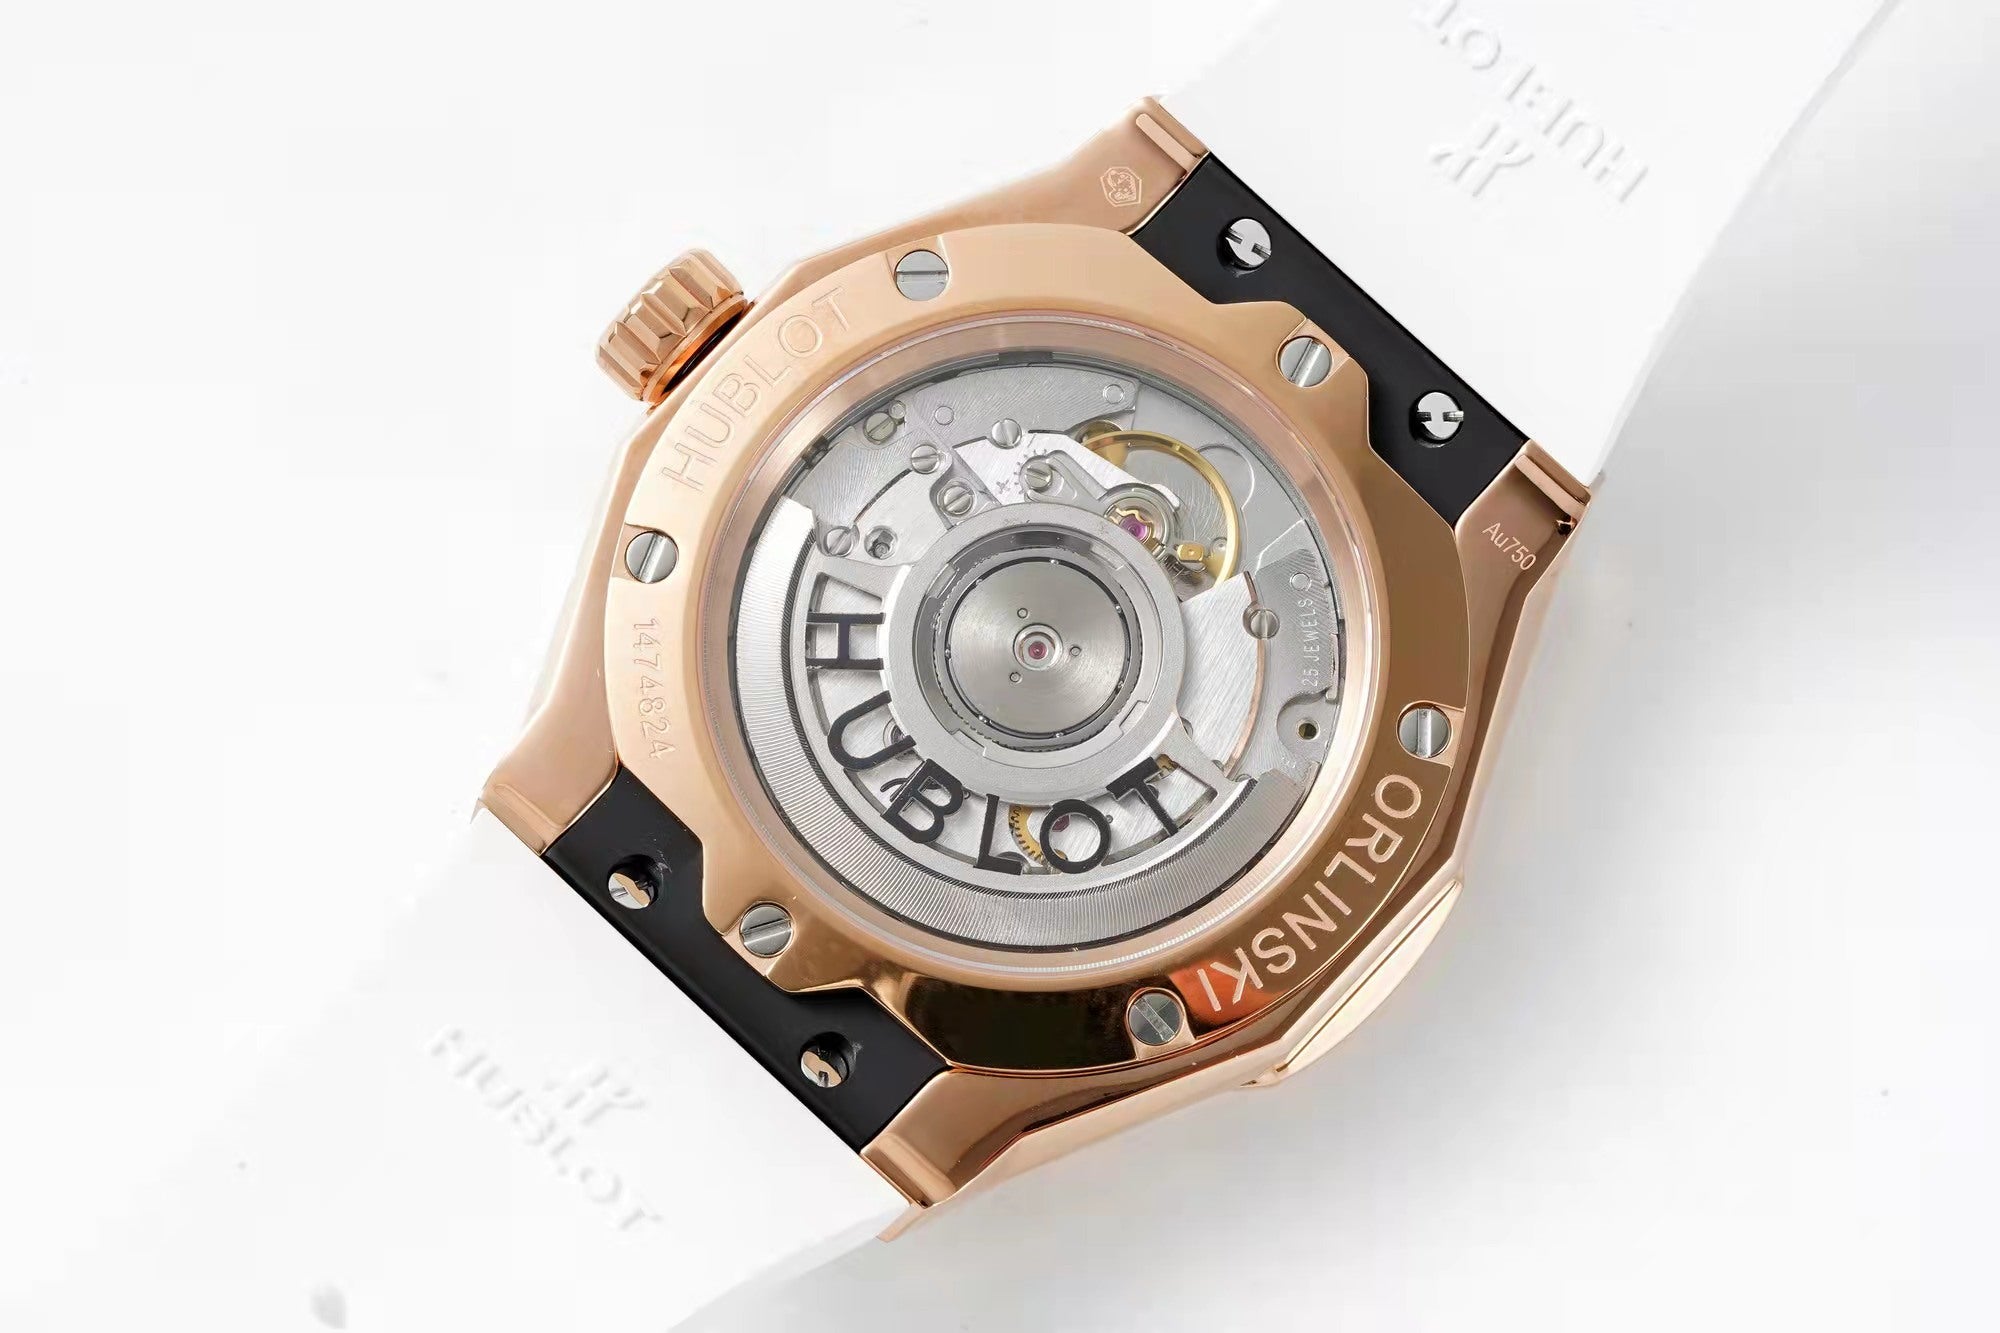 Analog New Trade World Hublot Watch for men Rose Gold Color, For Daily